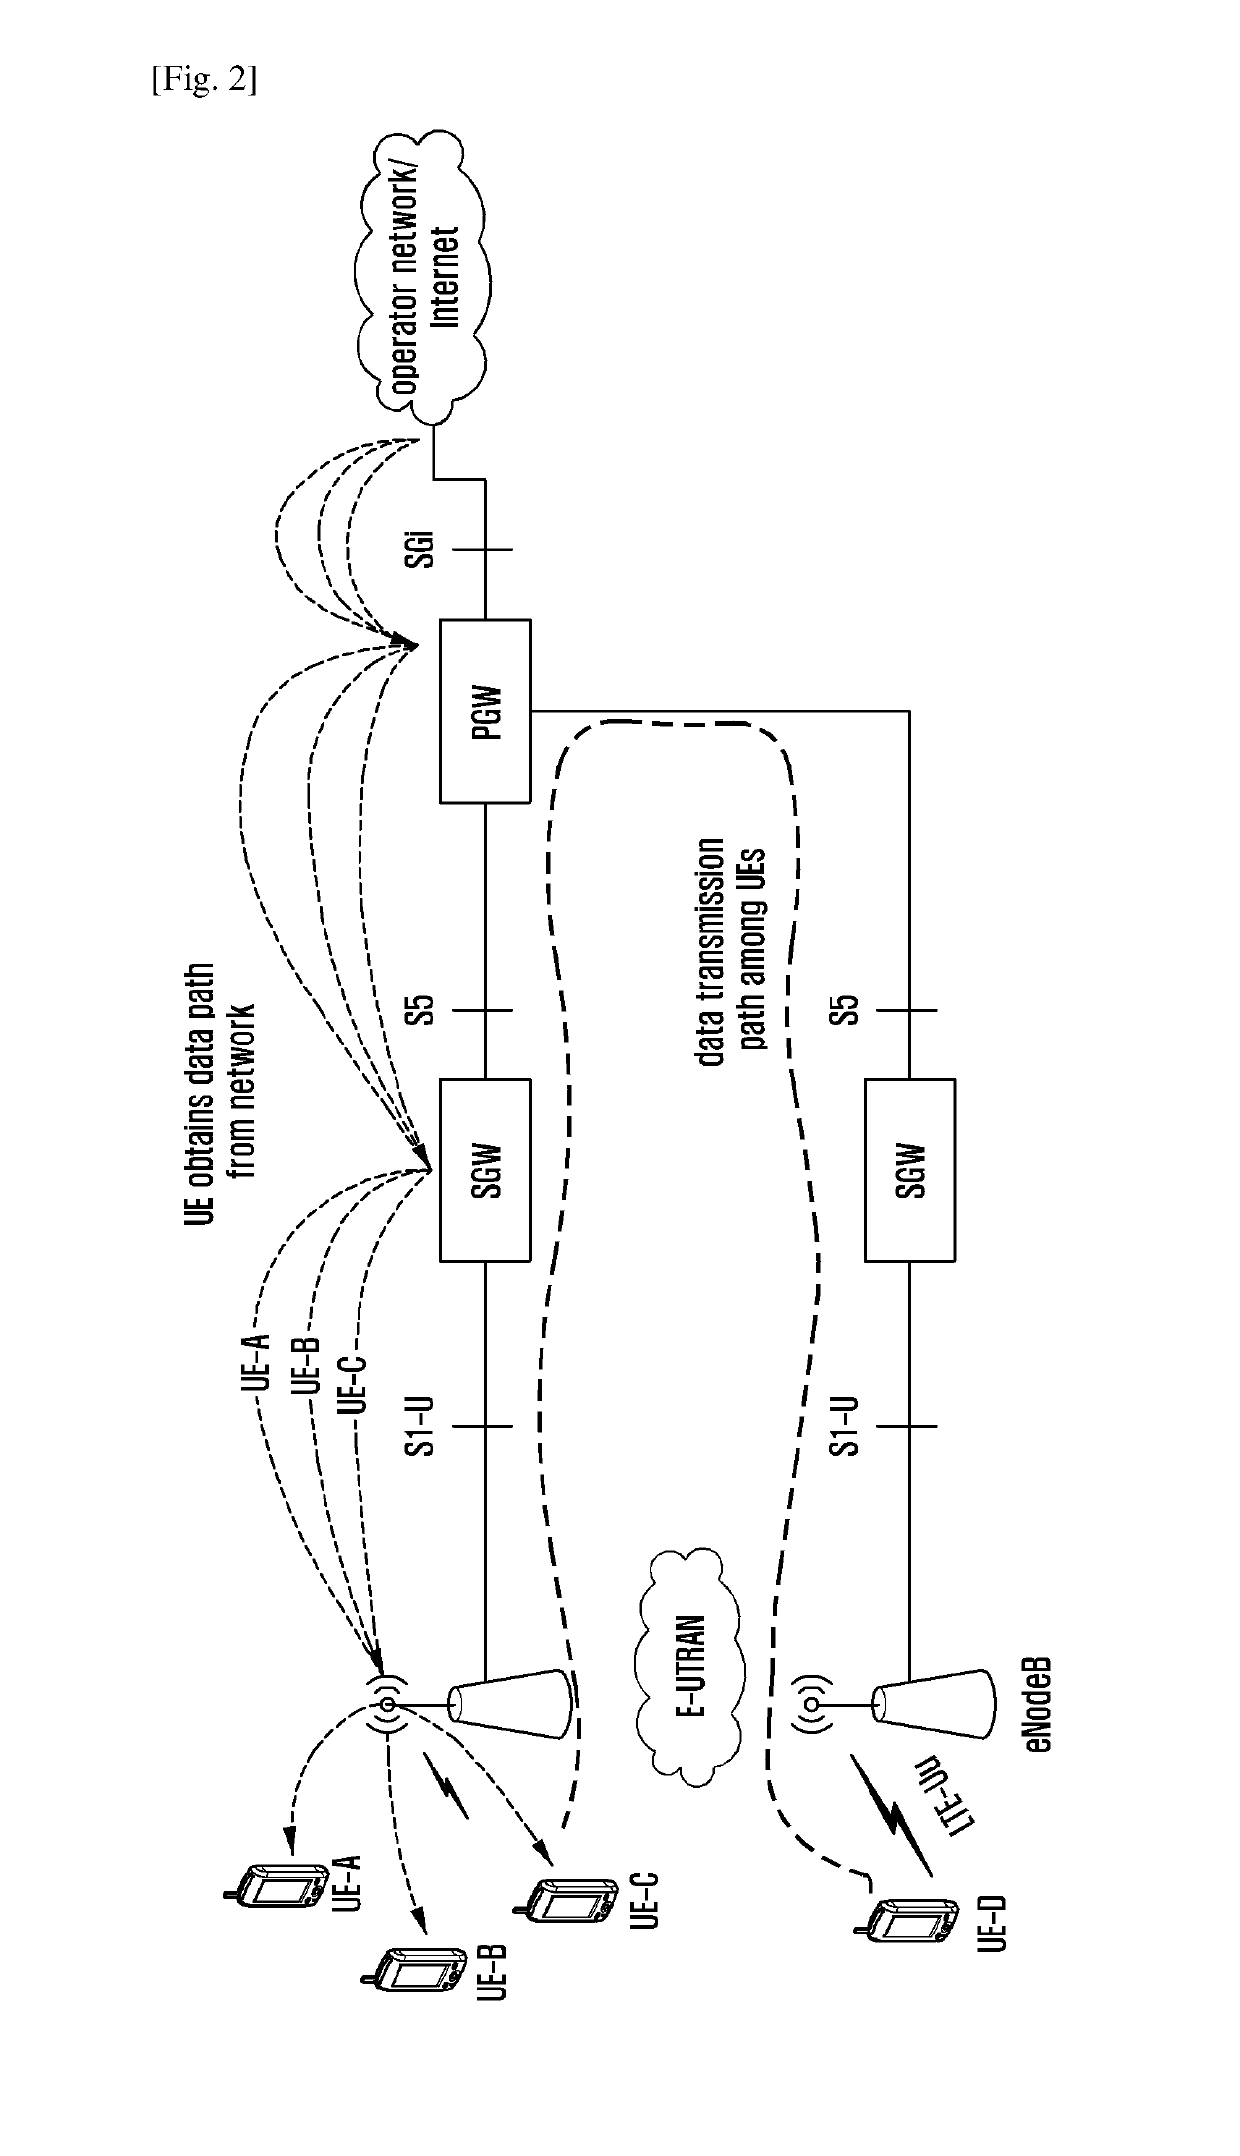 Cache-based data transmission methods and apparatuses